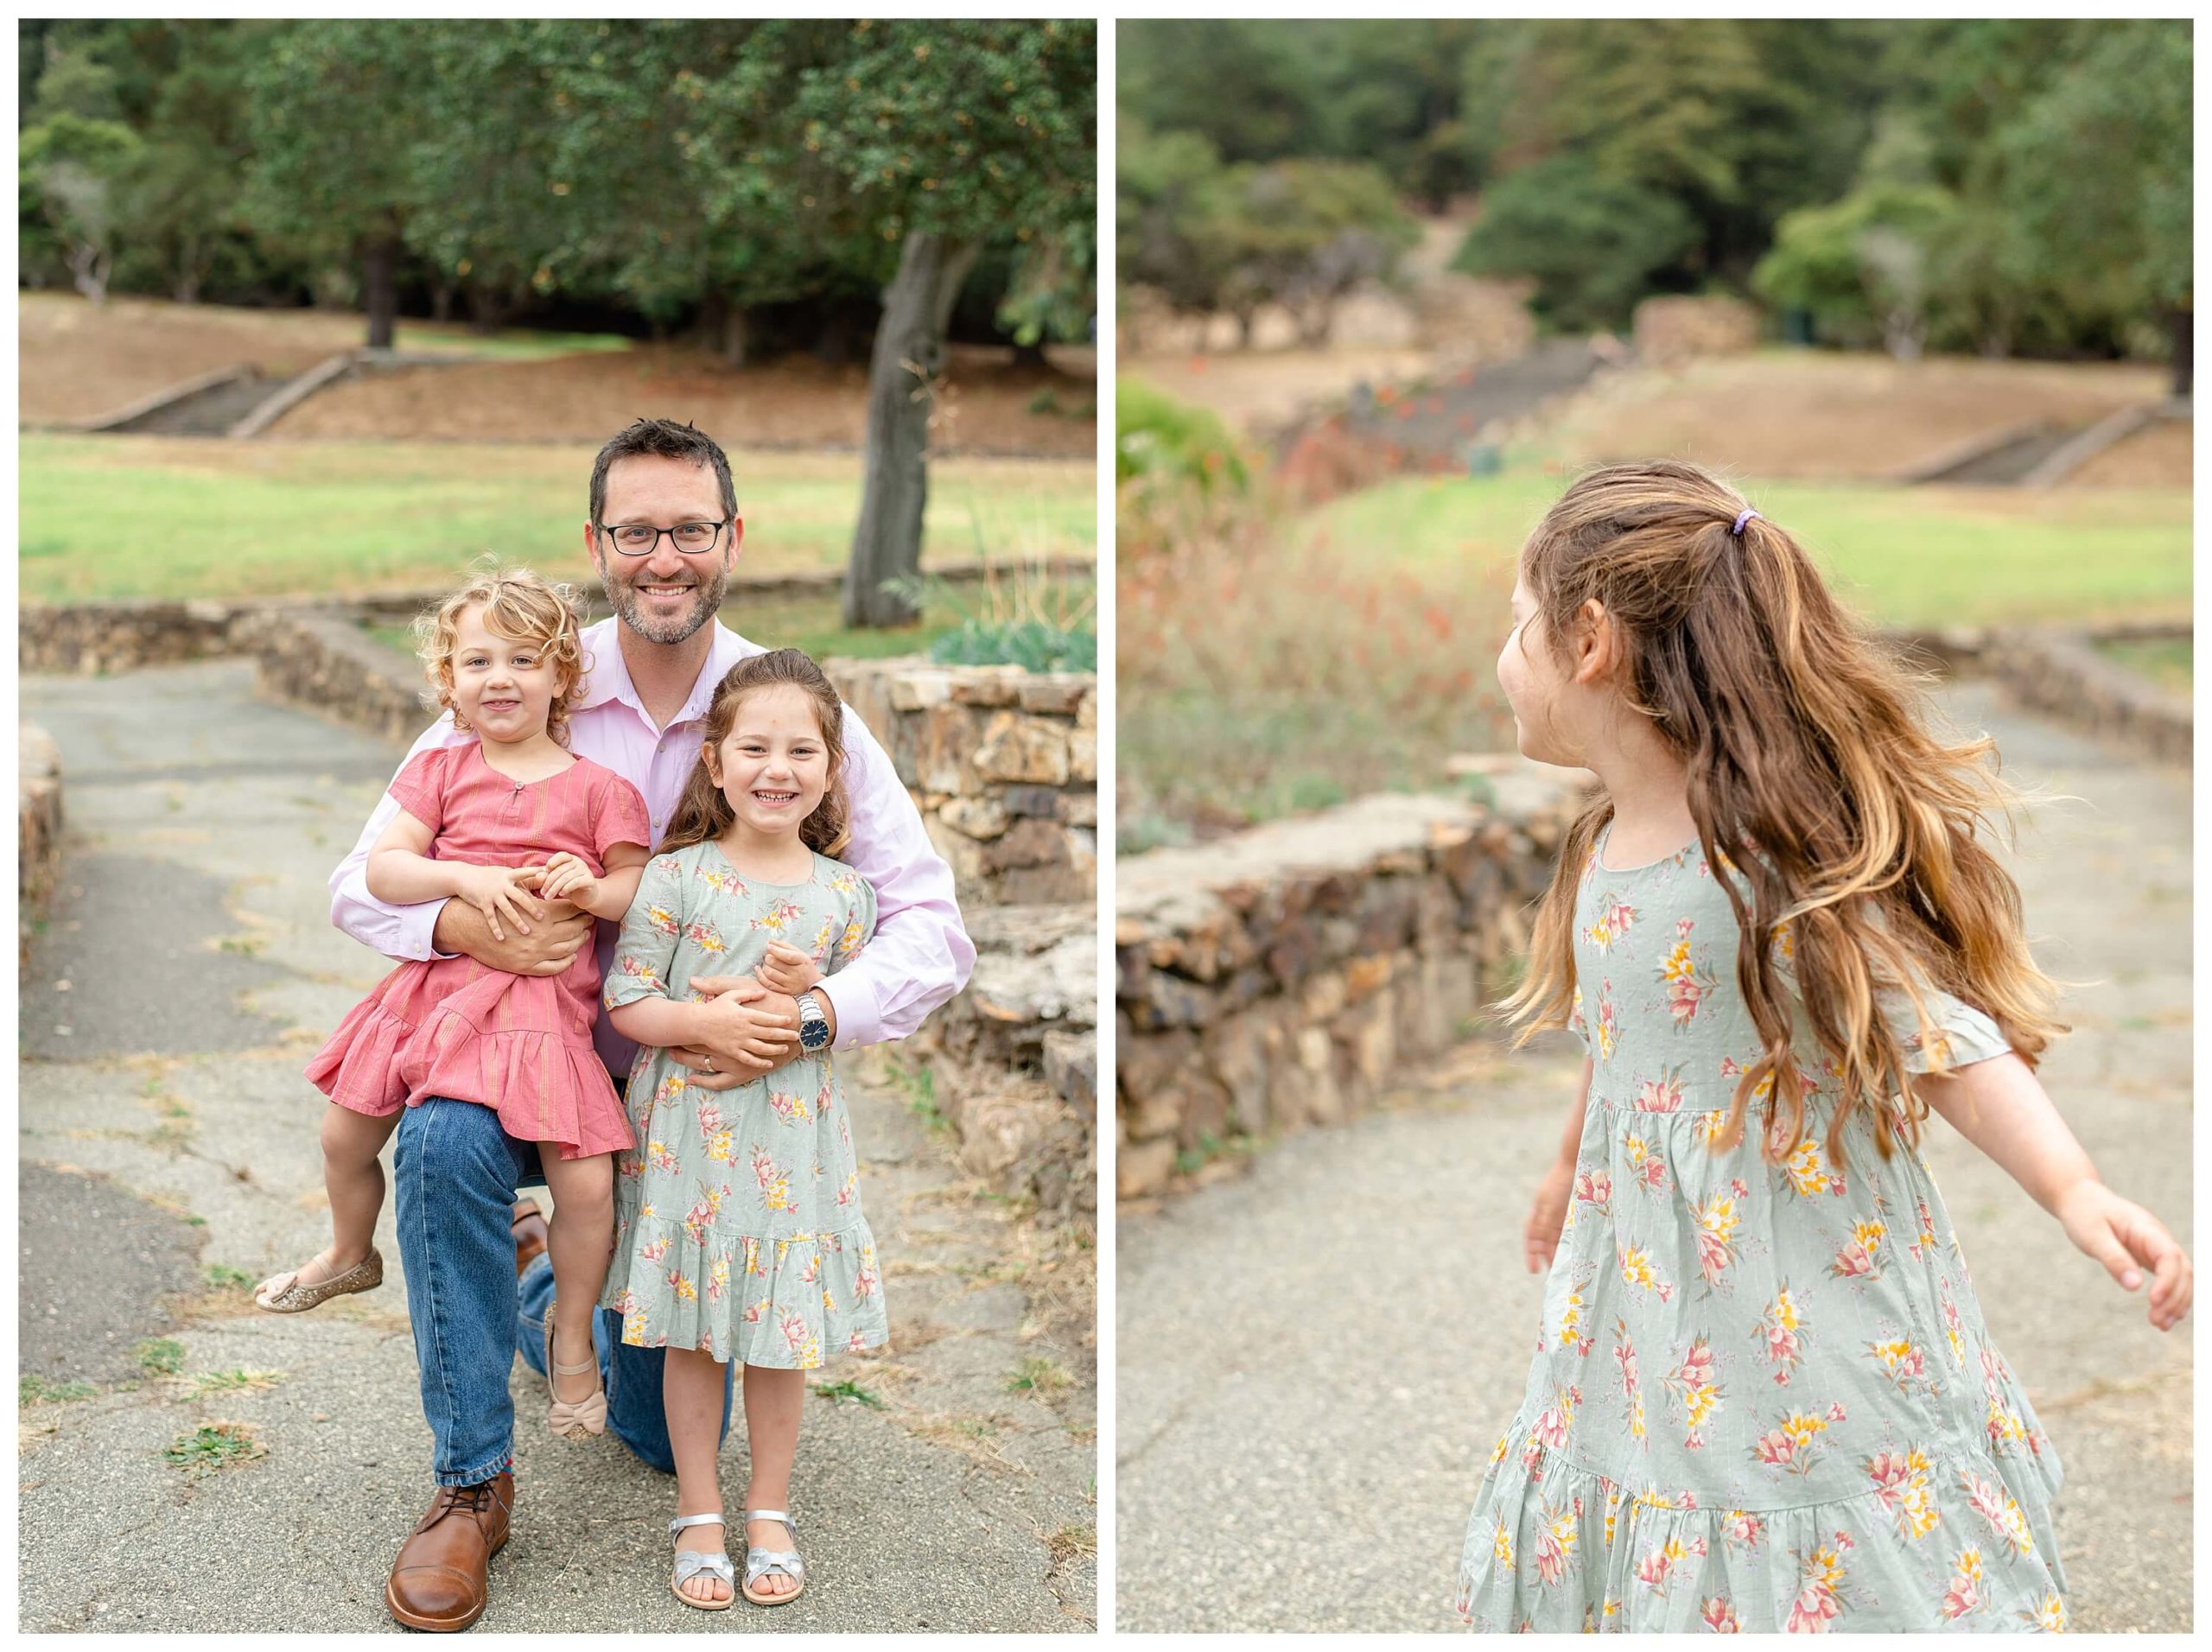 Left: A father kneels on the ground, hugging one daughter and holding the younger one on his knee as everyone smiles at the camera. Right: A young girl dances in a park as her dress and hair flow in the wind.